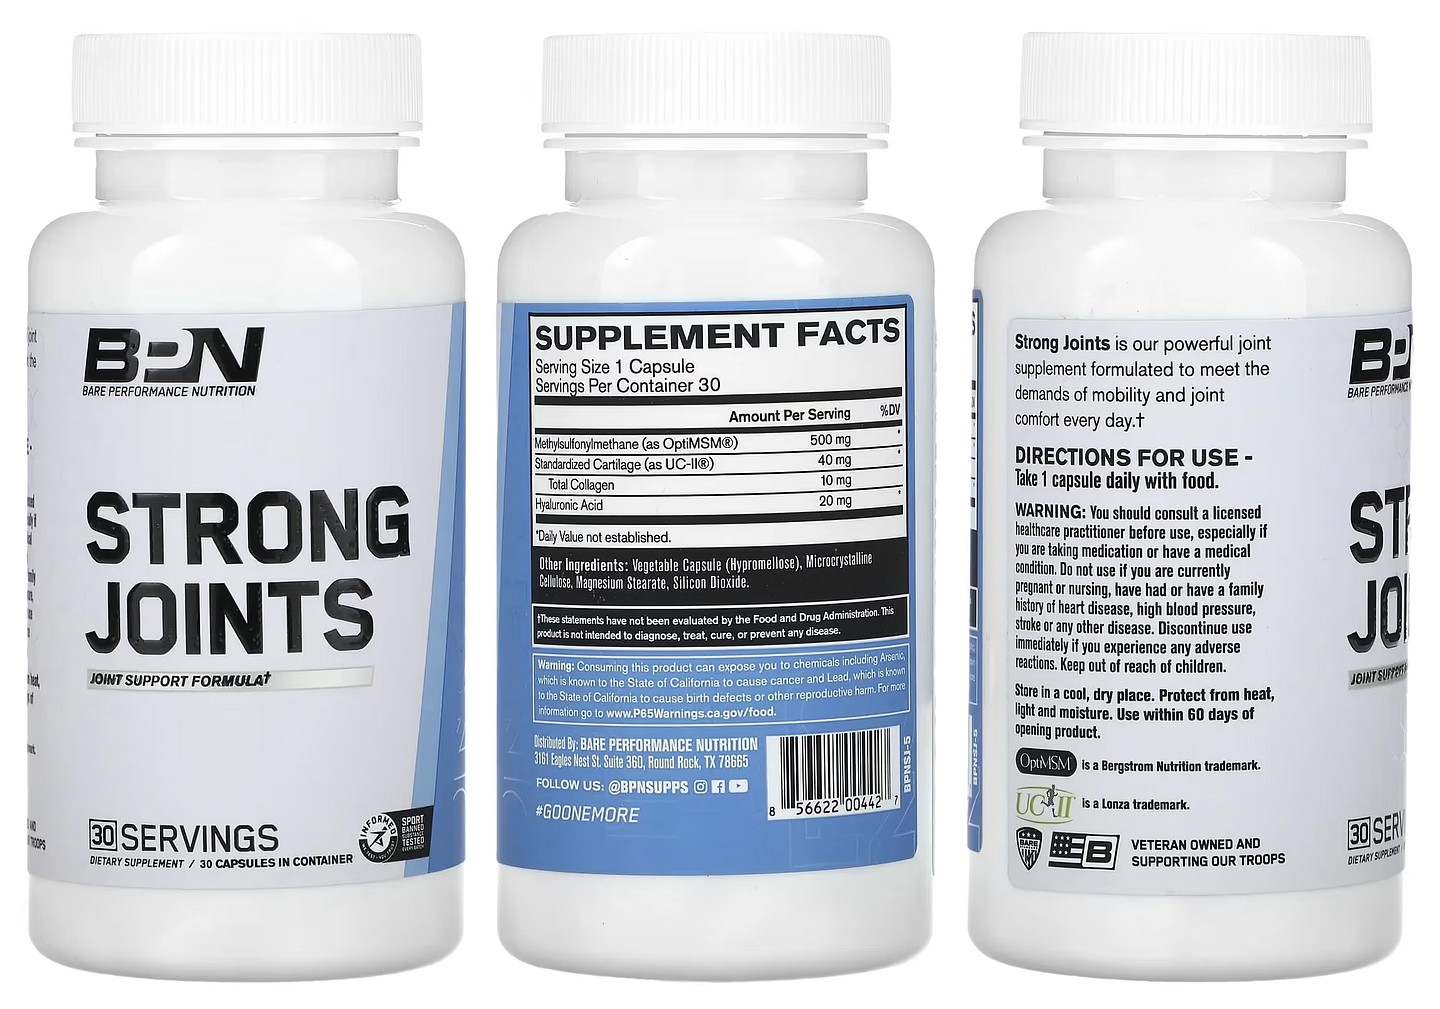 Bare Performance Nutrition, Strong Joints packaging